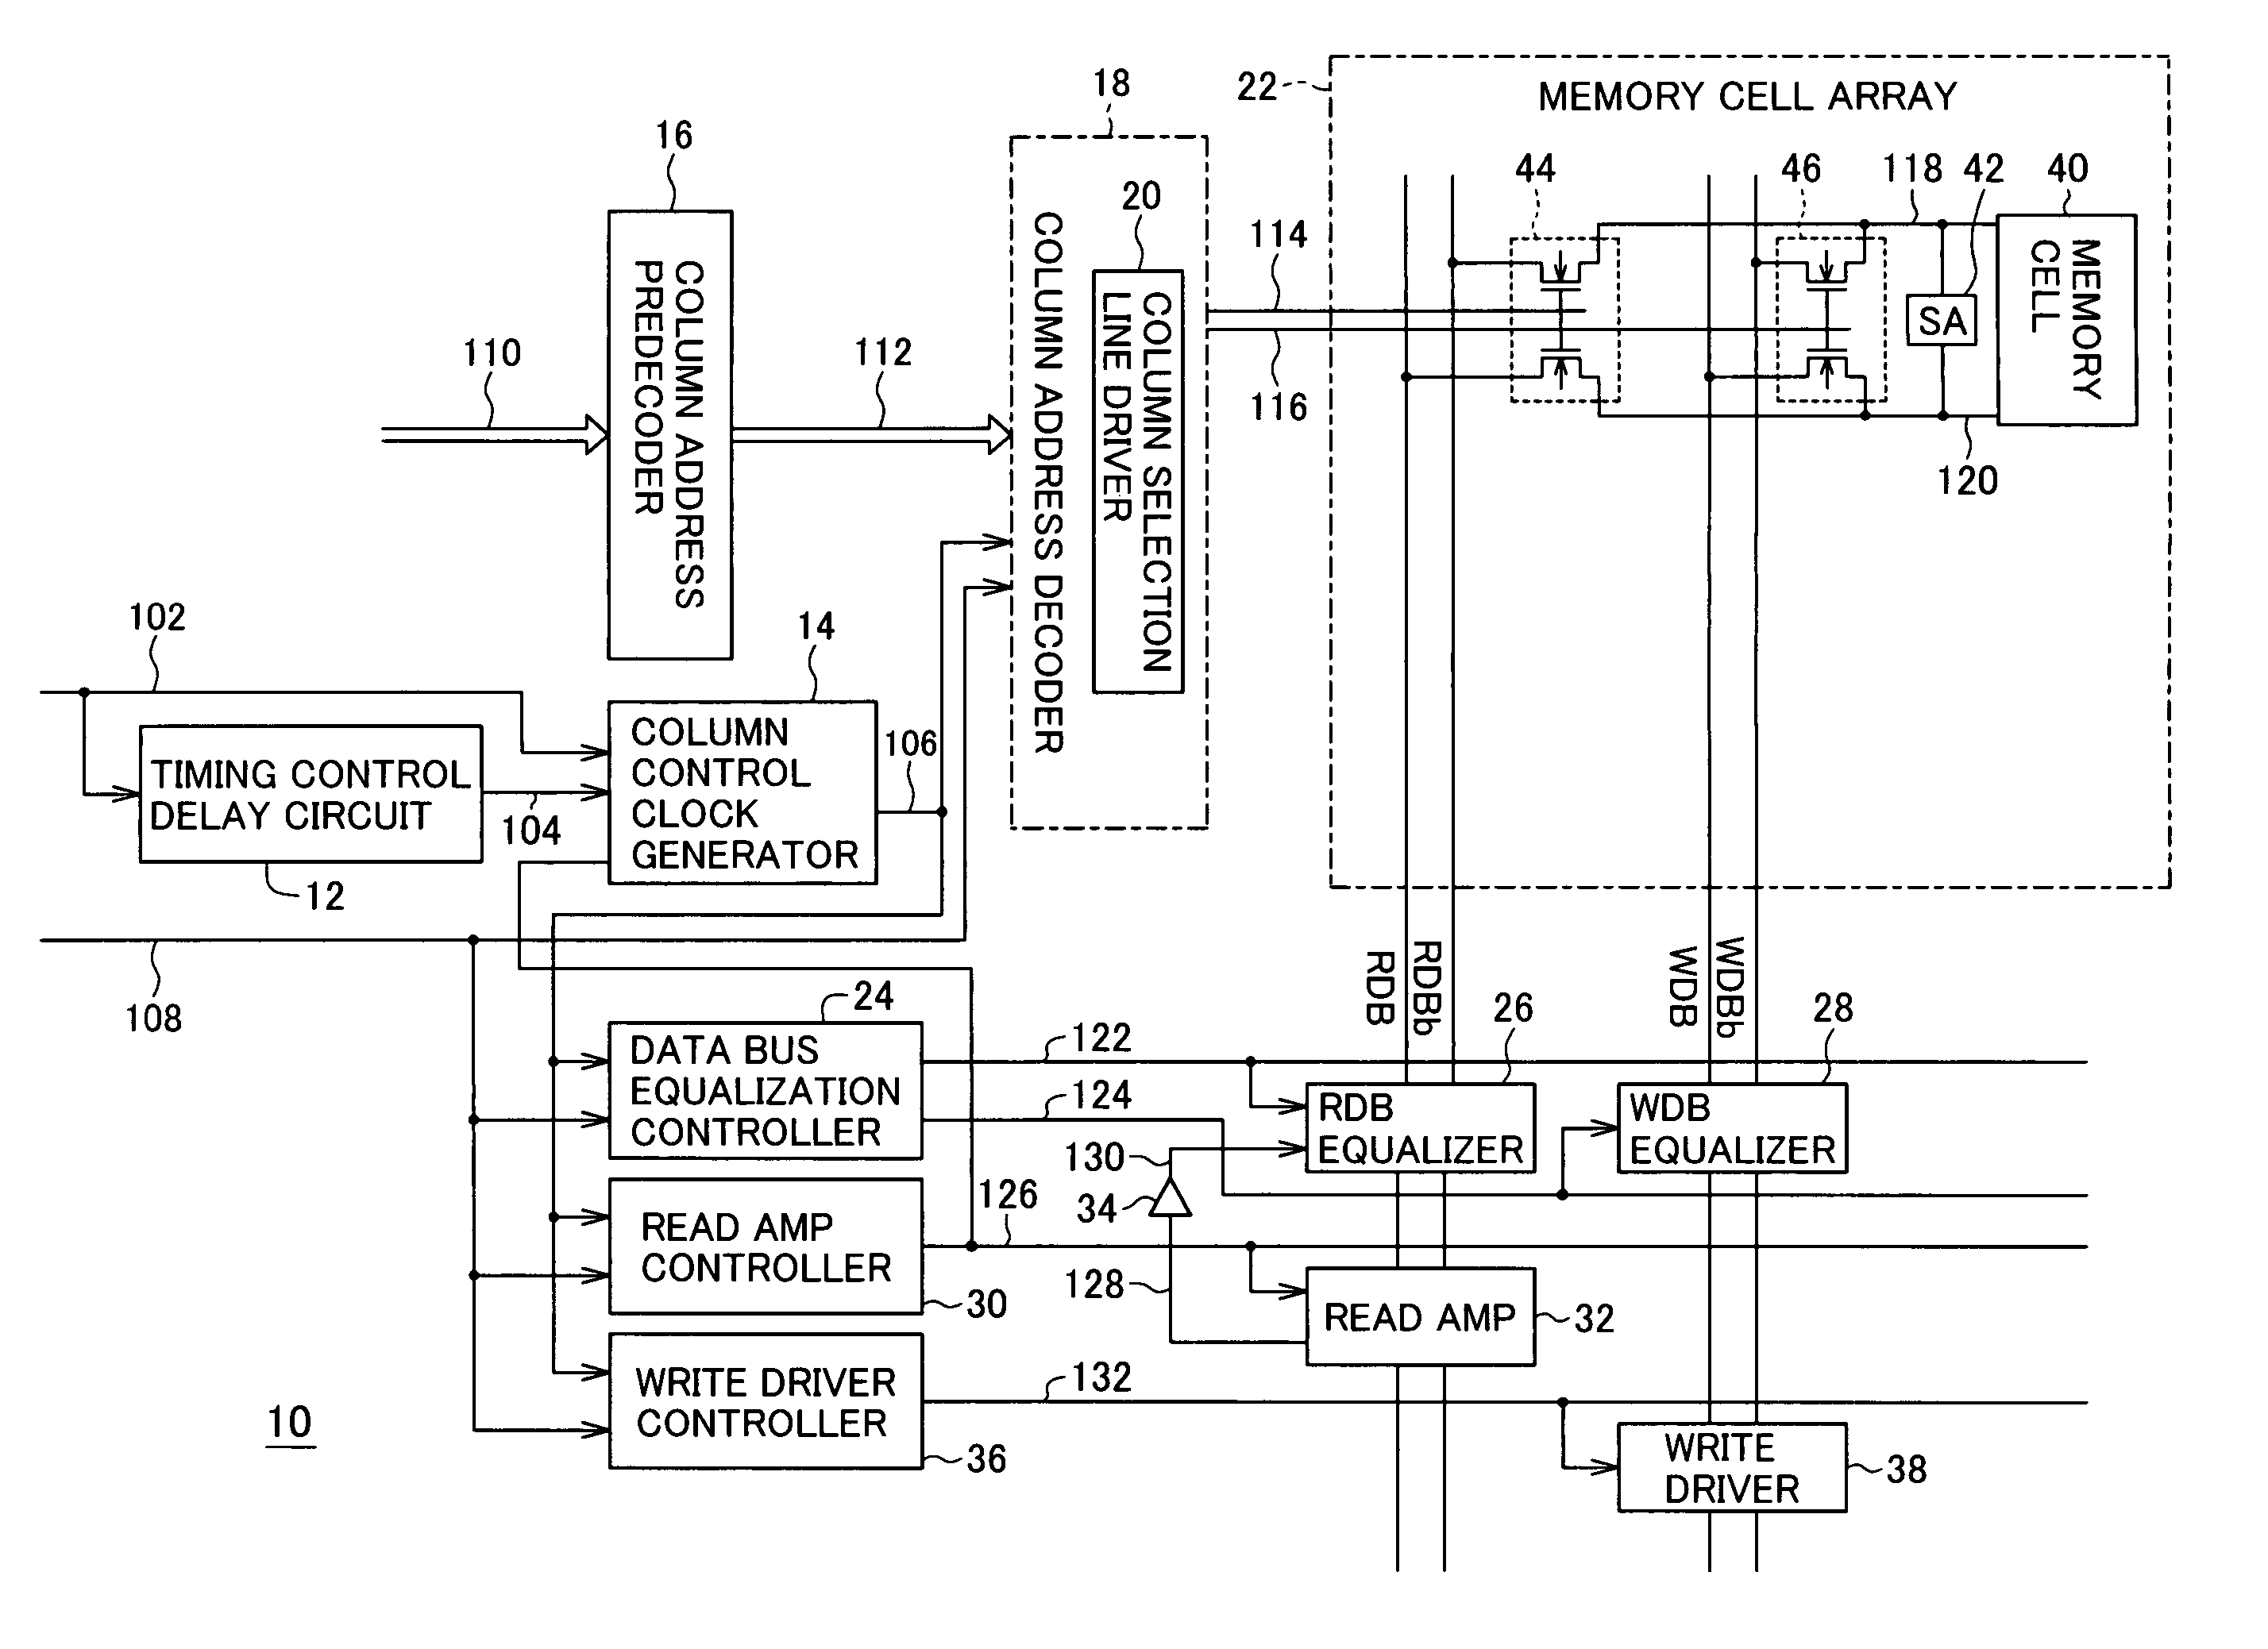 High-speed synchronous memory device